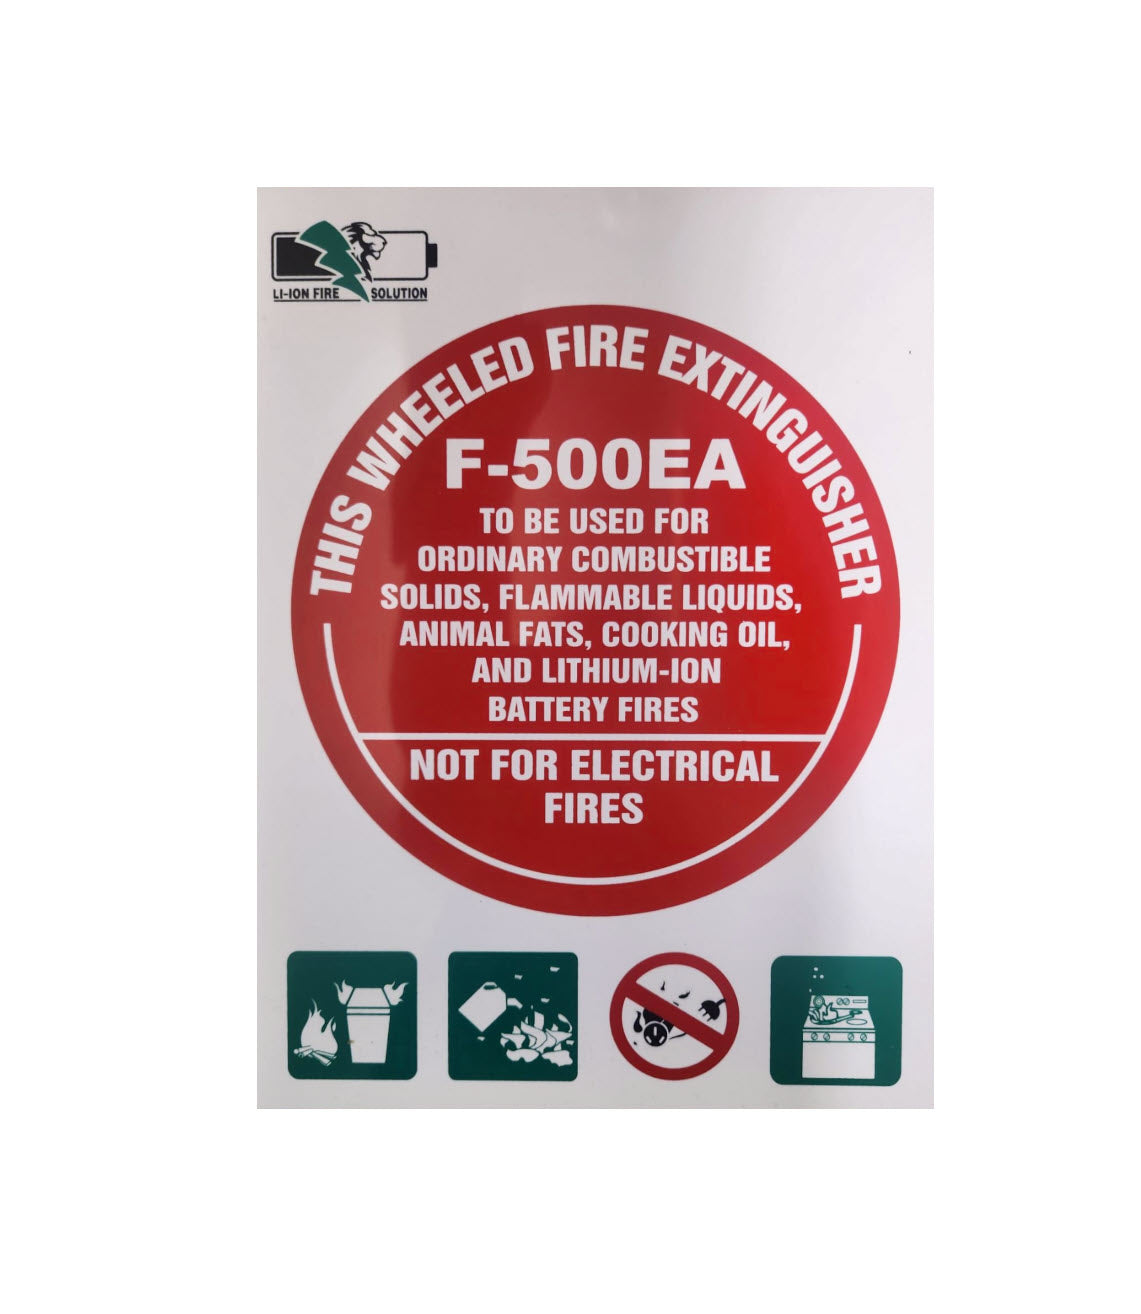 Mobile F-500 Extinguisher I.D Sign - Premium  from LI-ion Fire solution - Shop now at Firebox Australia